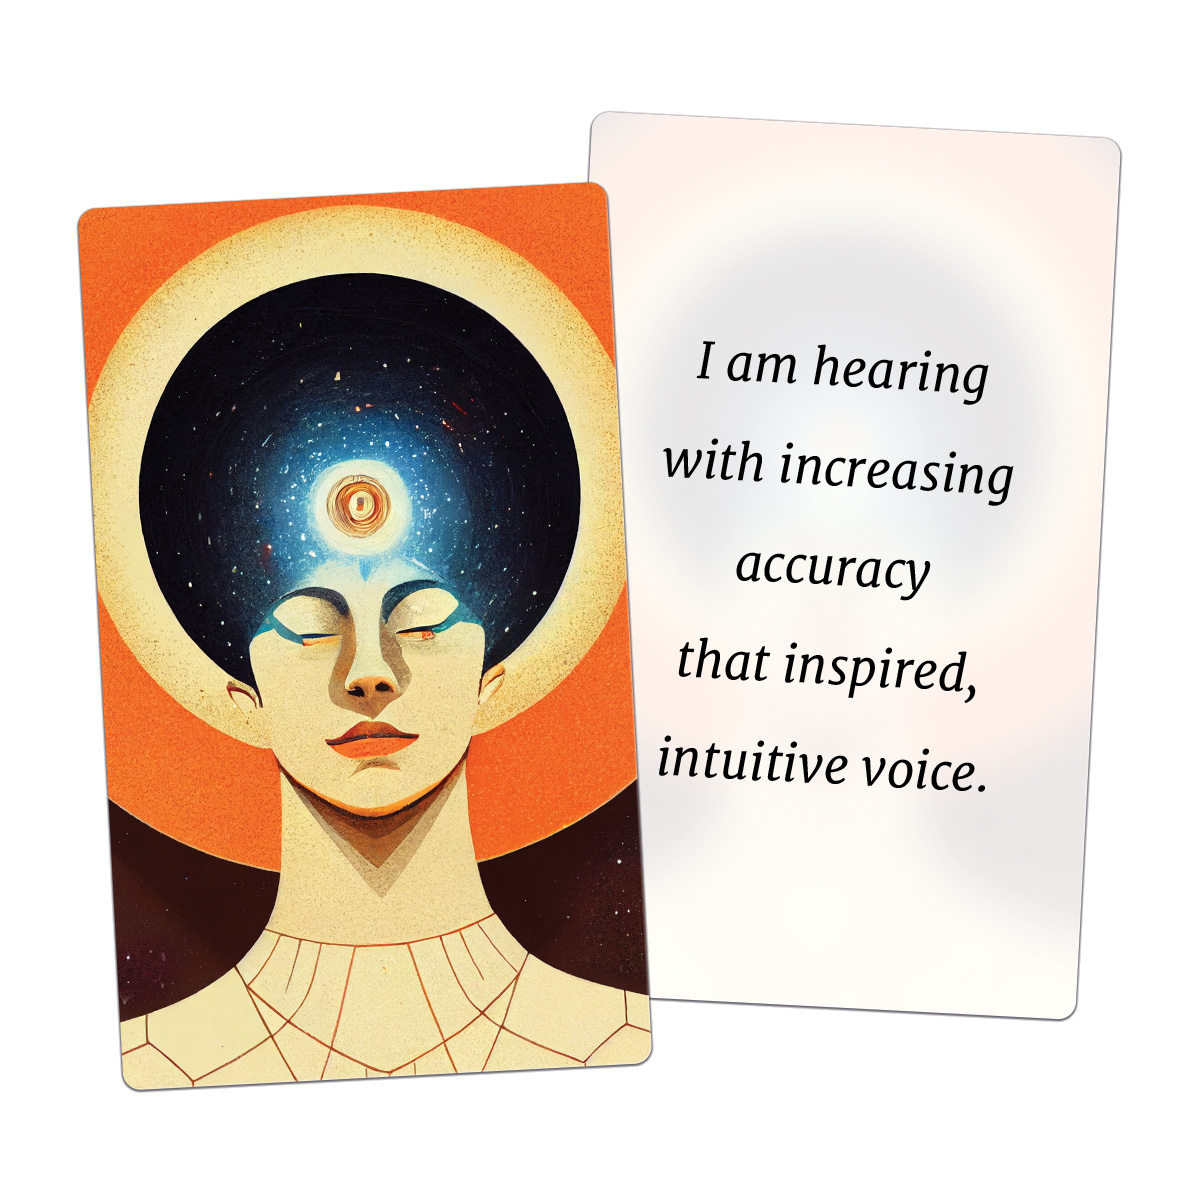 I am hearing with increasing accuracy that inspired, intuitive voice. (AFFIRMATION CARD)